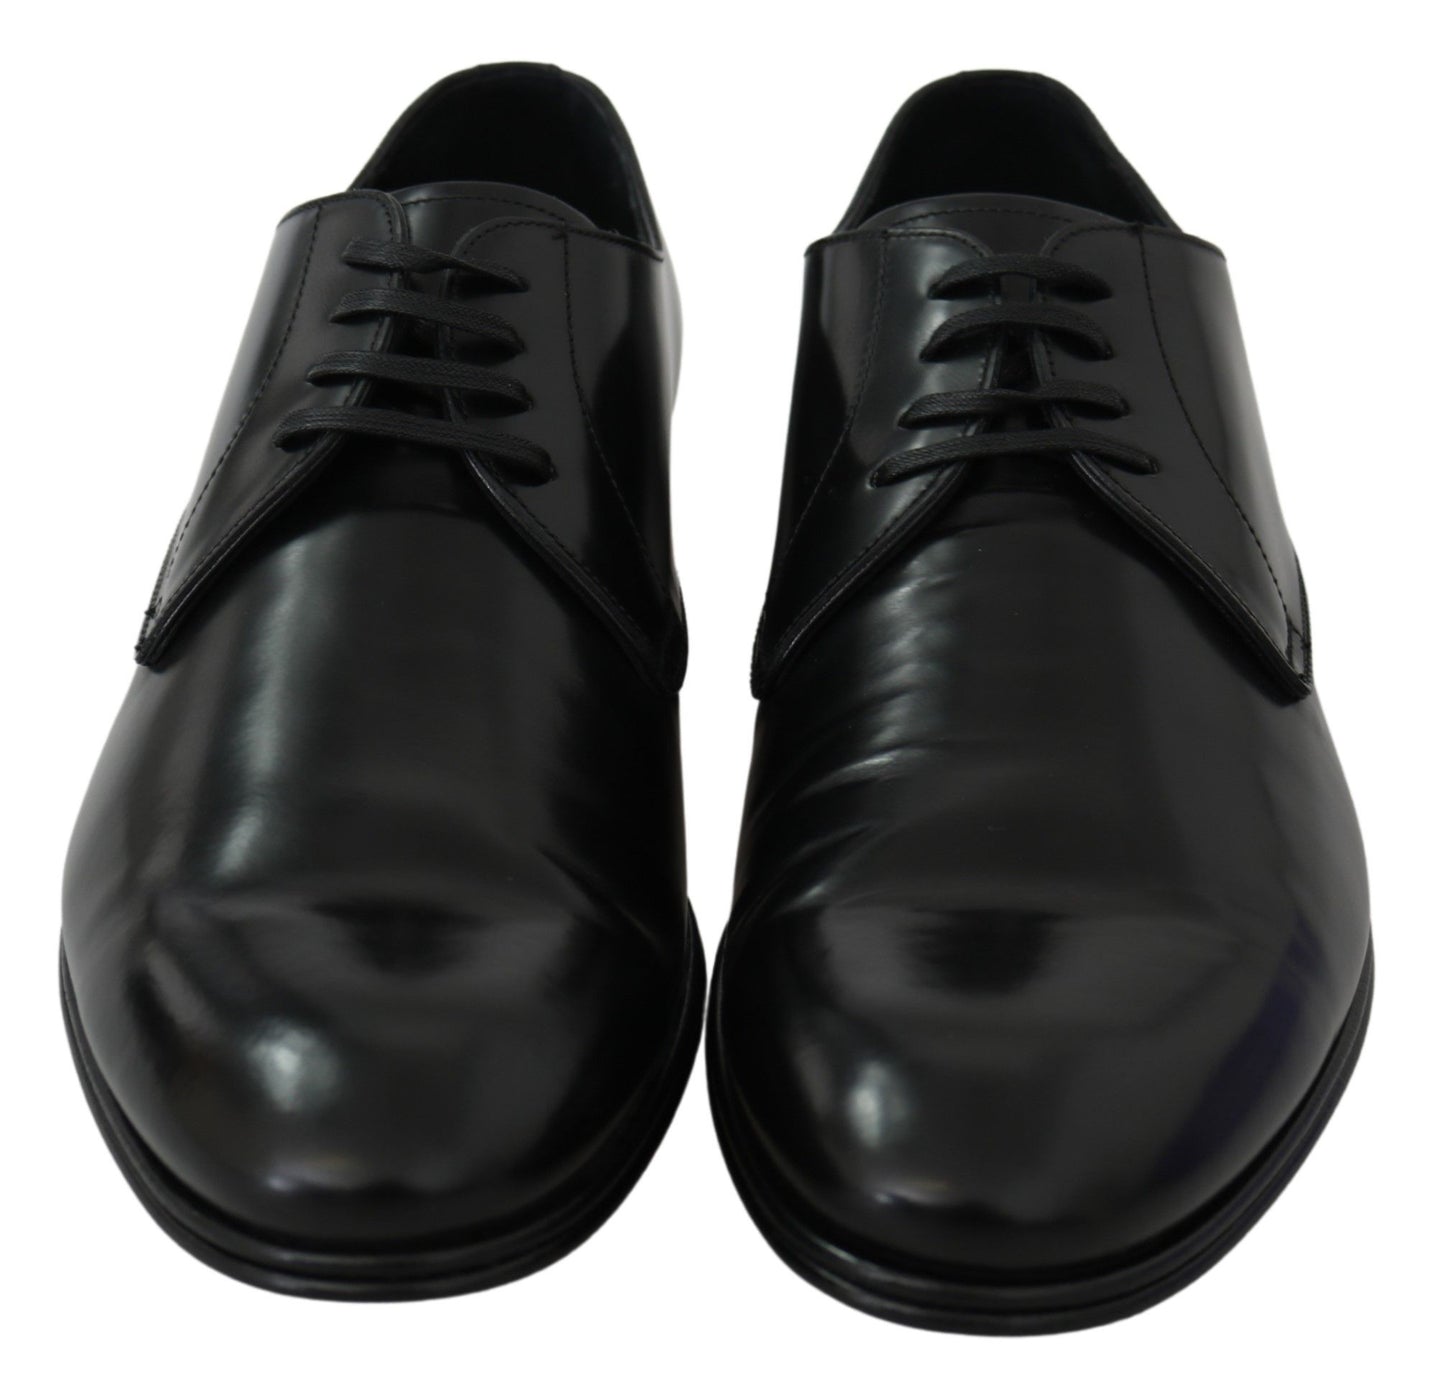 Derby Napoli Black Leather Dress Formal Shoes - Designed by Dolce & Gabbana Available to Buy at a Discounted Price on Moon Behind The Hill Online Designer Discount Store